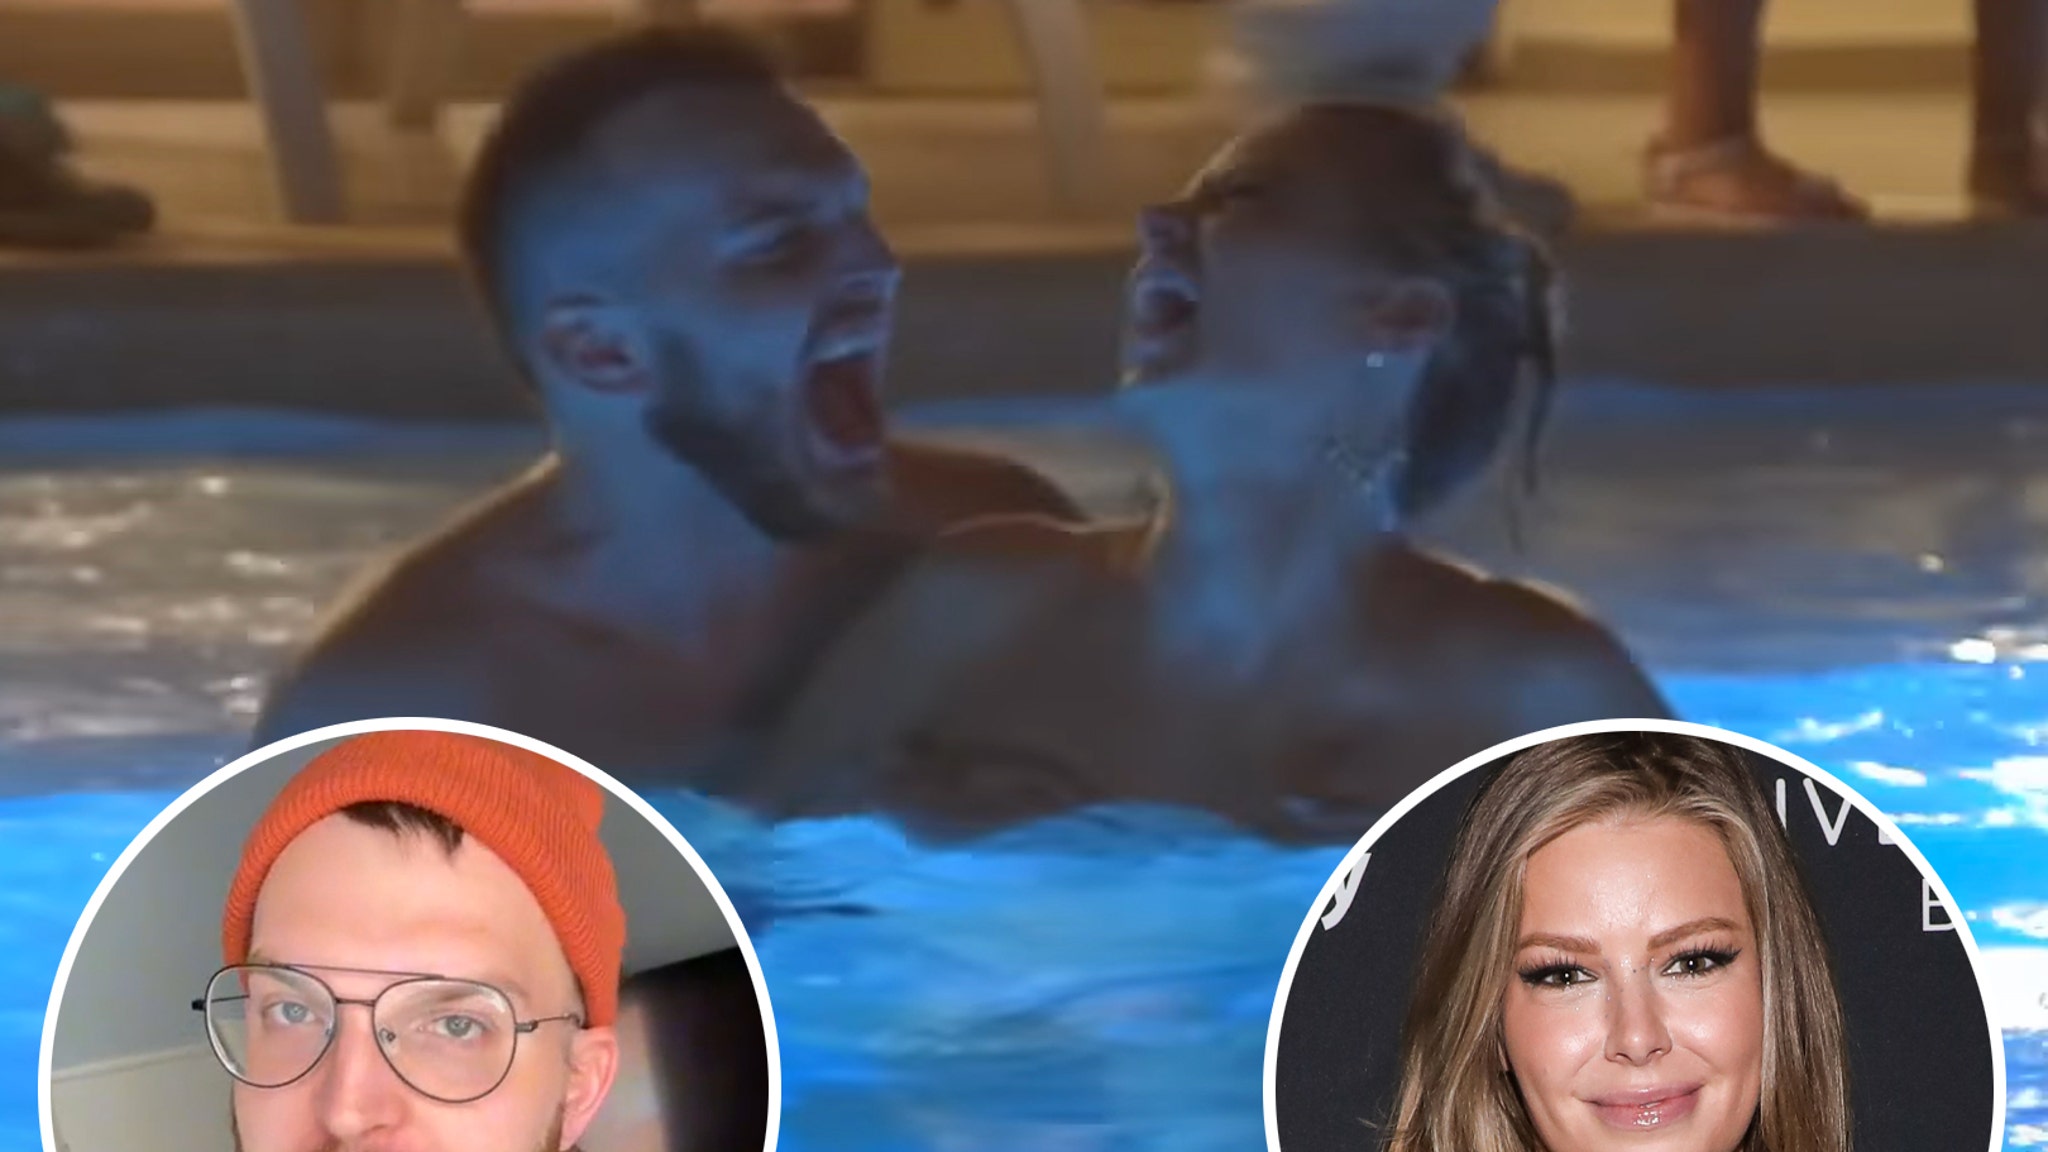 Man Skinny-Dipping with Ariana Madix in Vanderpump Rules Trailer Speaks Out